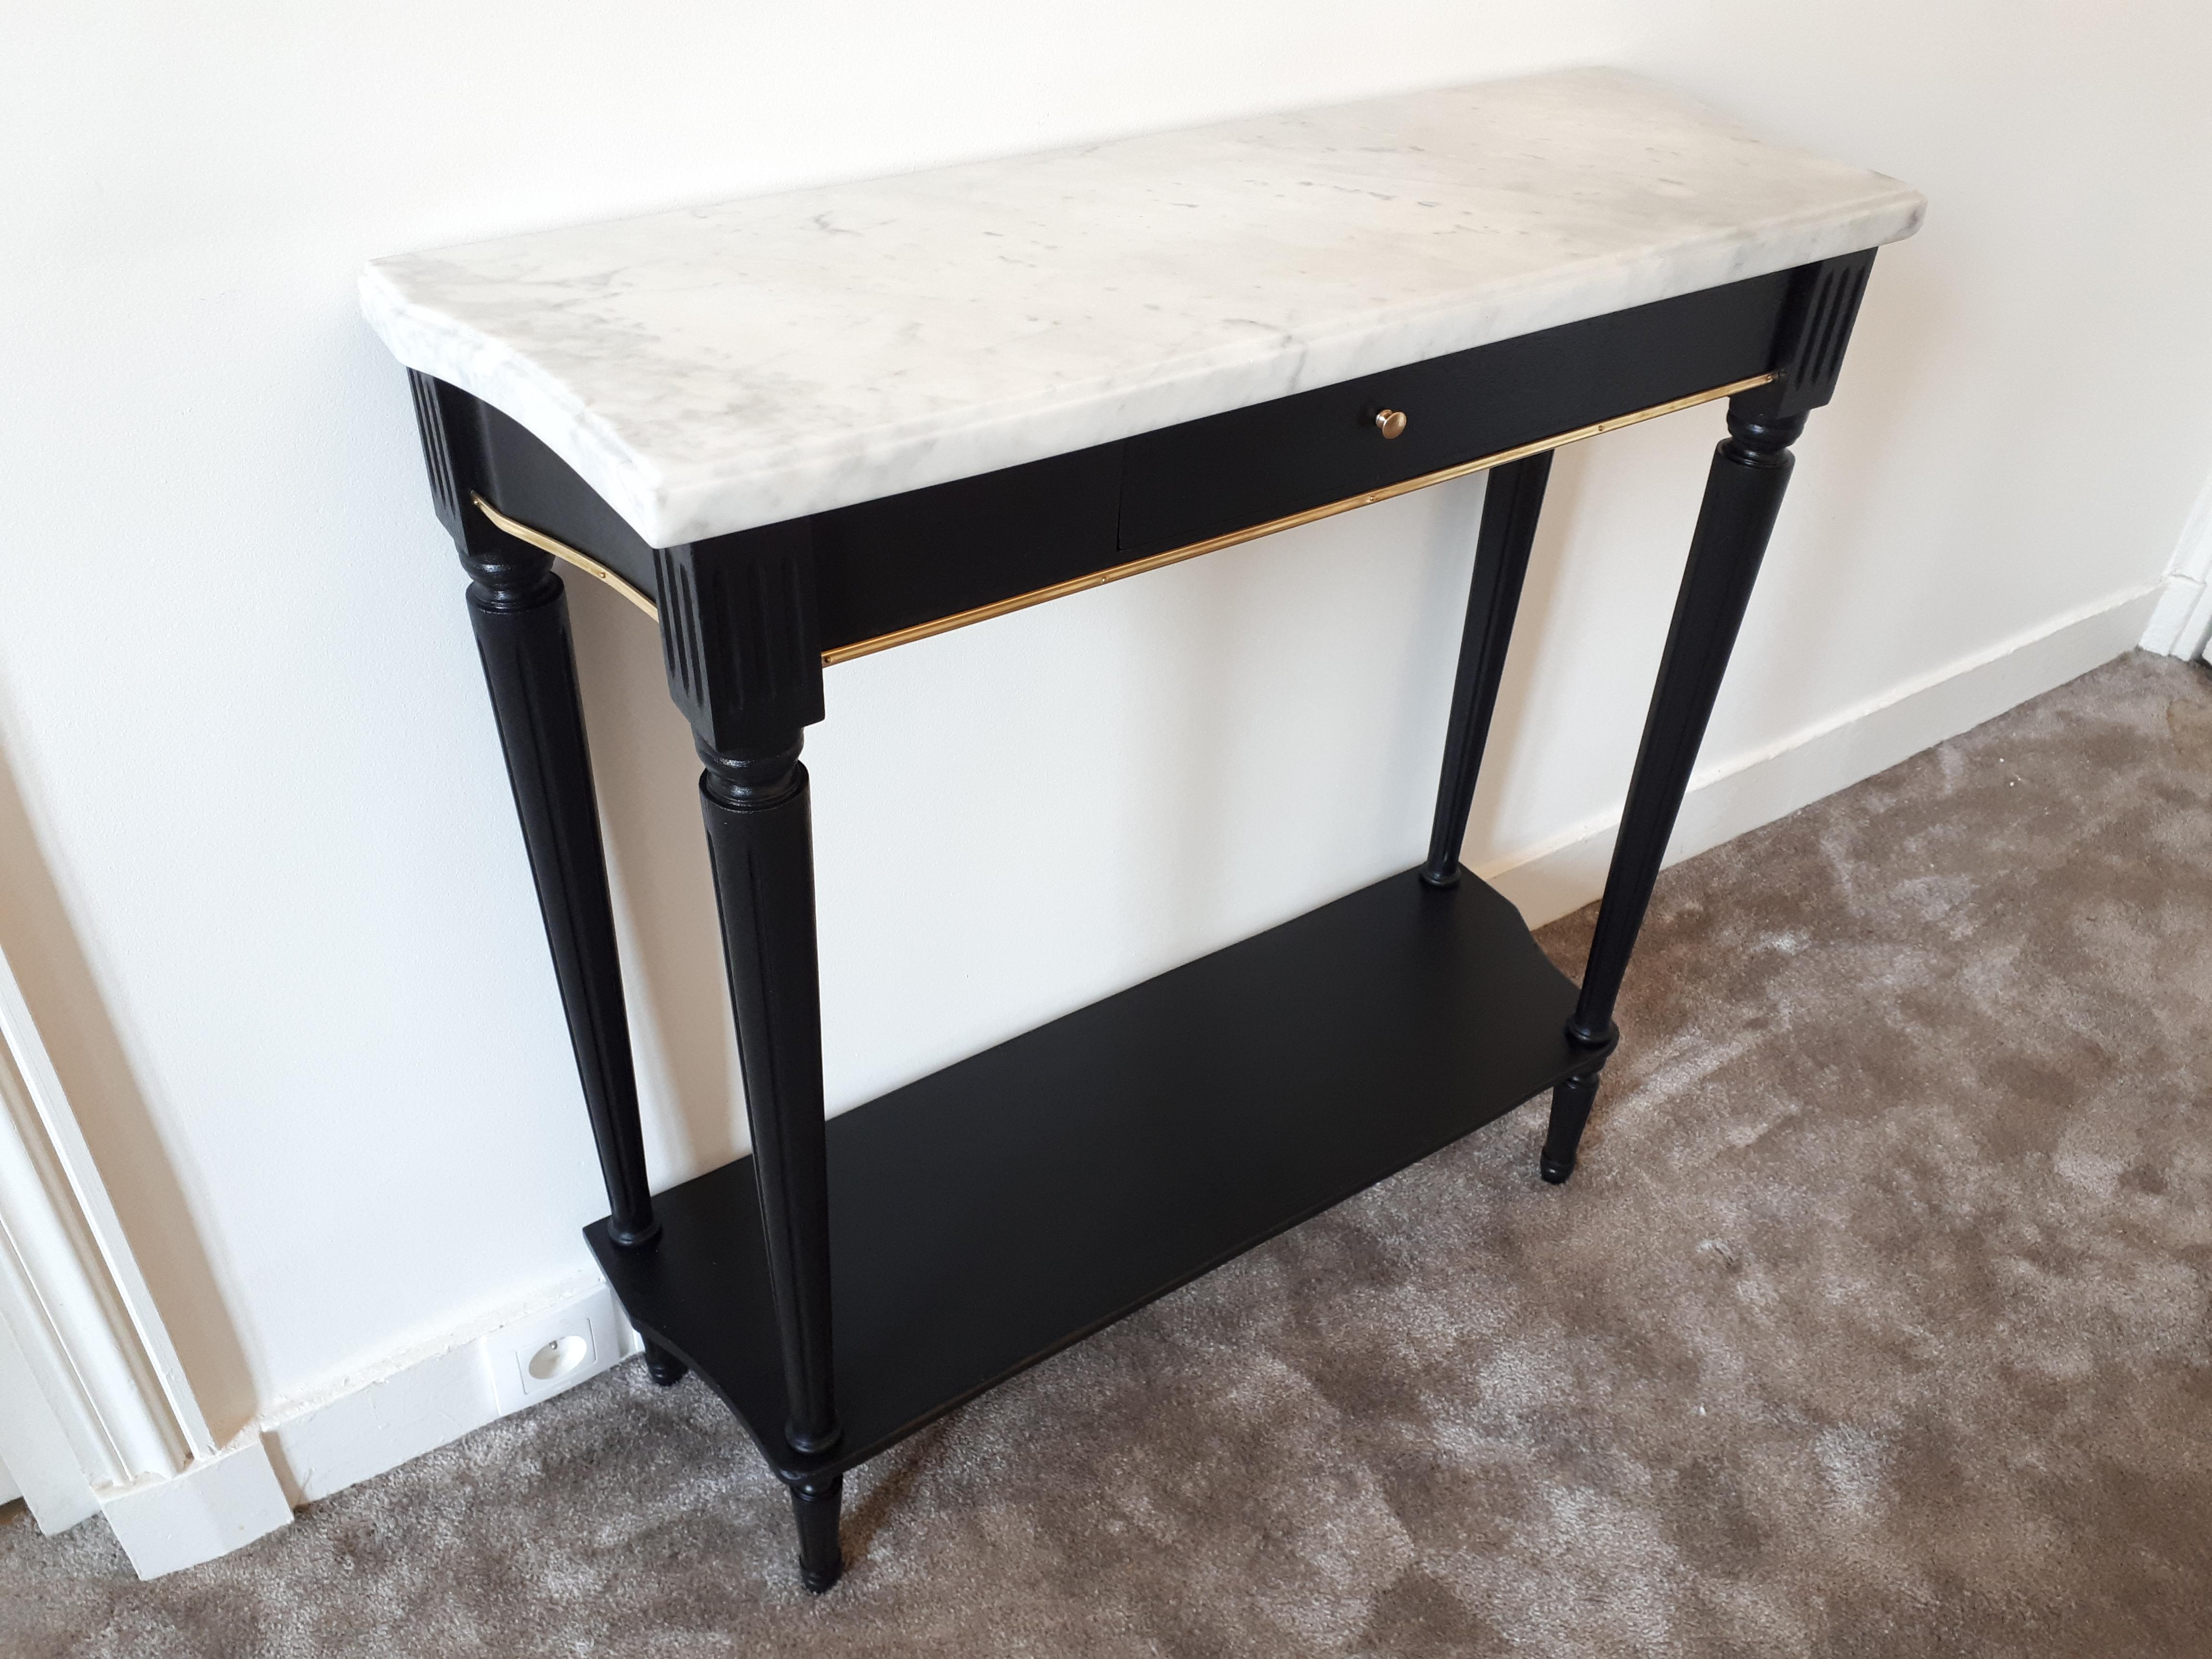 French Louis XVI style console with a dovetail drawer in front and top is in Carrara marble 3 centimeters thick. 
The legs and feet are fluted and meet by a lower shelf. 
This piece is mahogany painted black. 
Golden brass chopsticks highlight